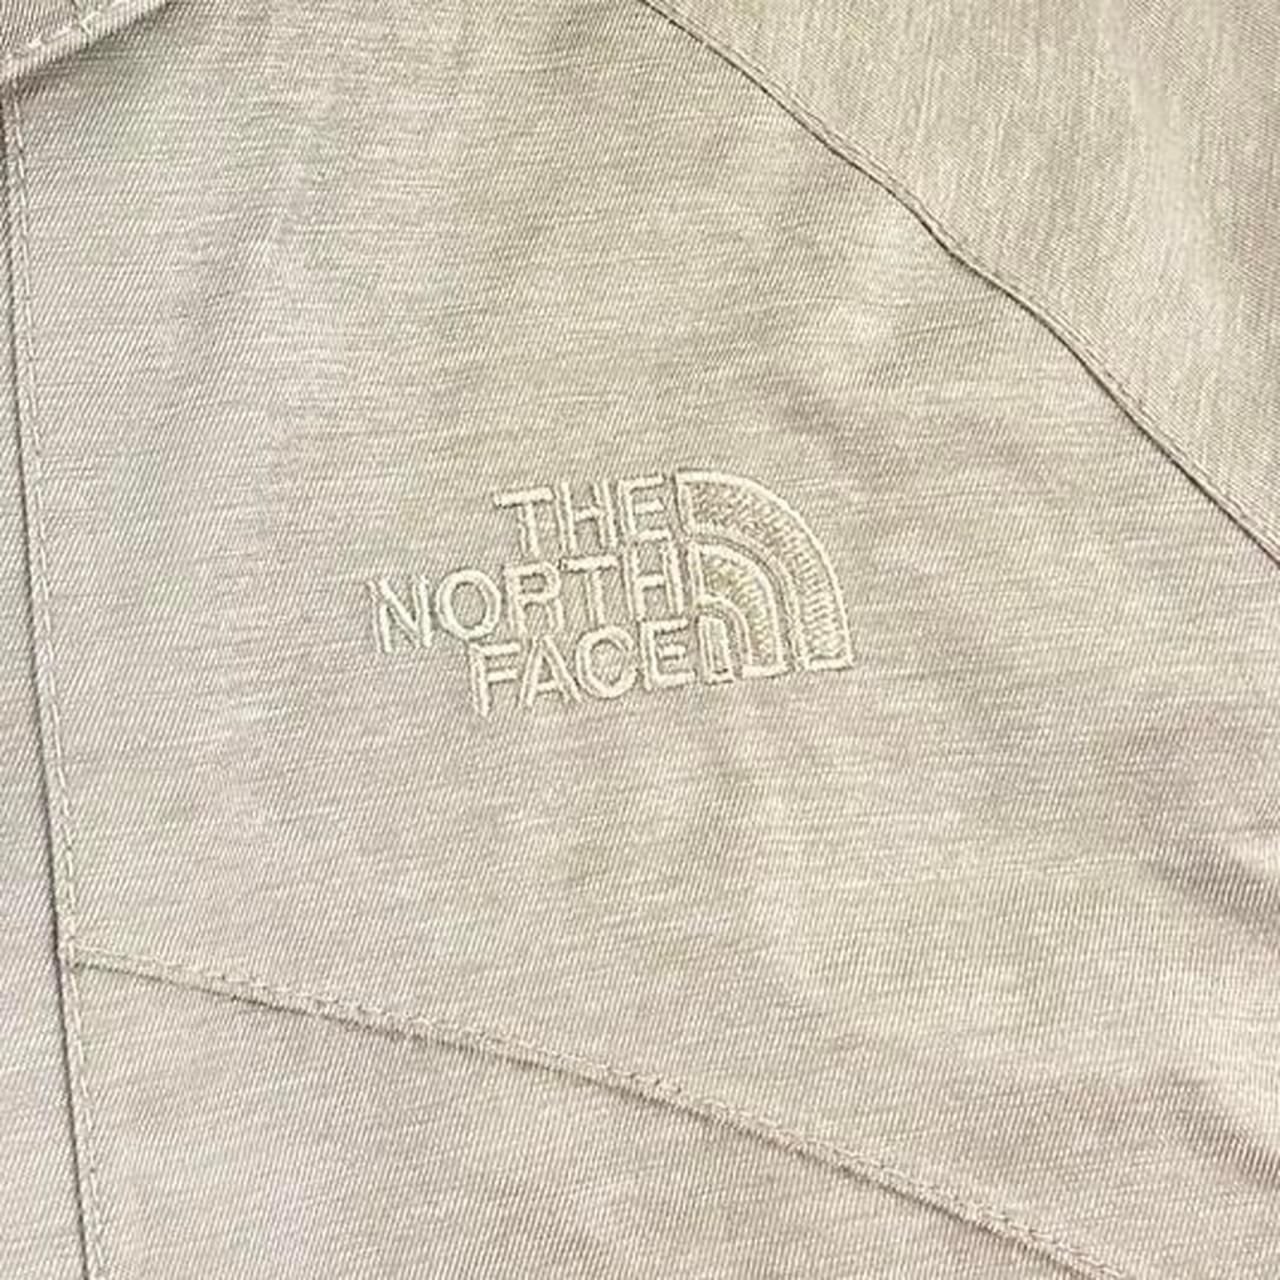 North Face Hyvent jacket woman’s size L - Known Source